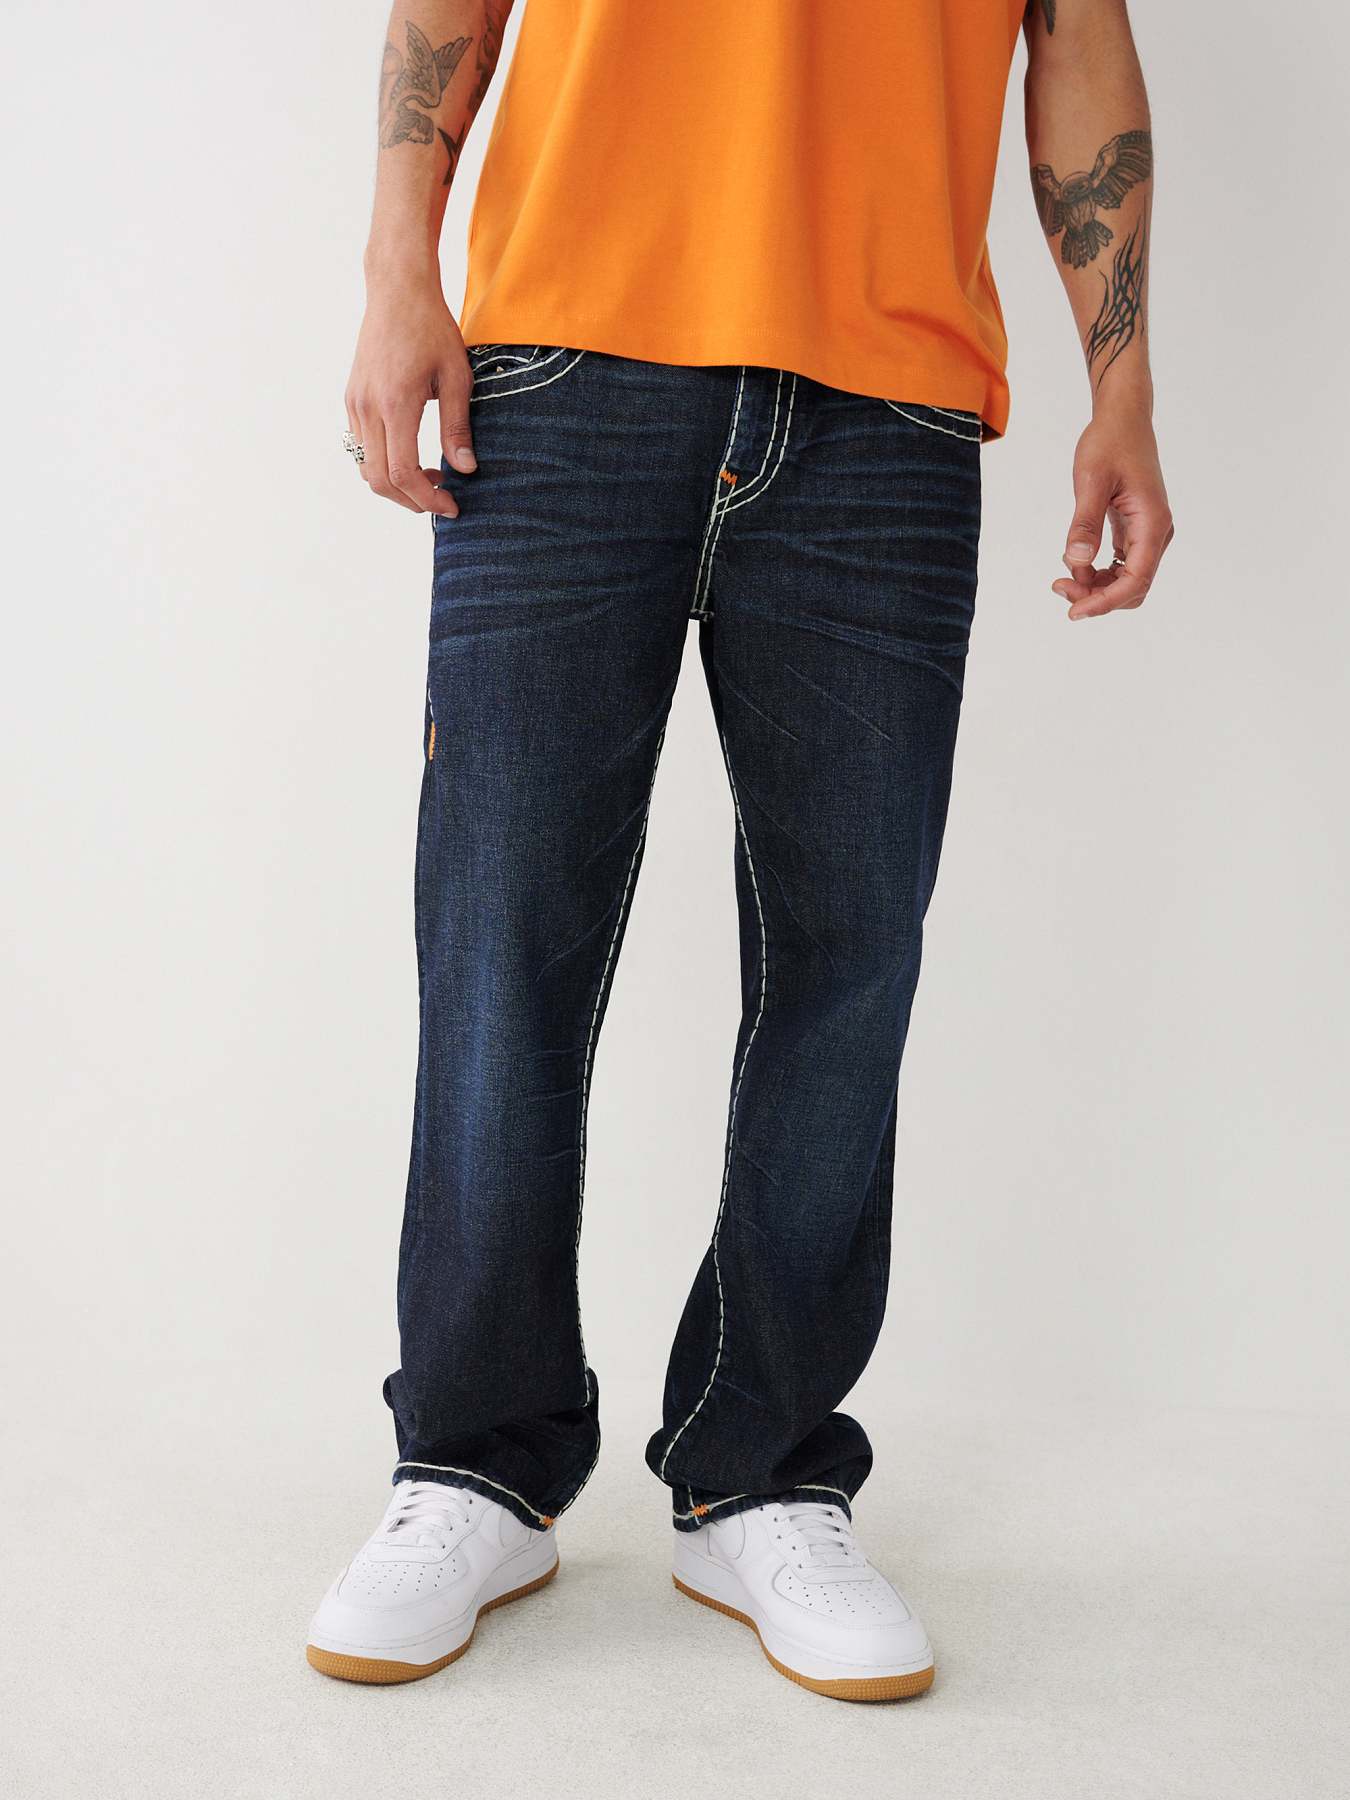 BILLY DOUBLE RAISED HS SUPER T BOOTCUT JEAN